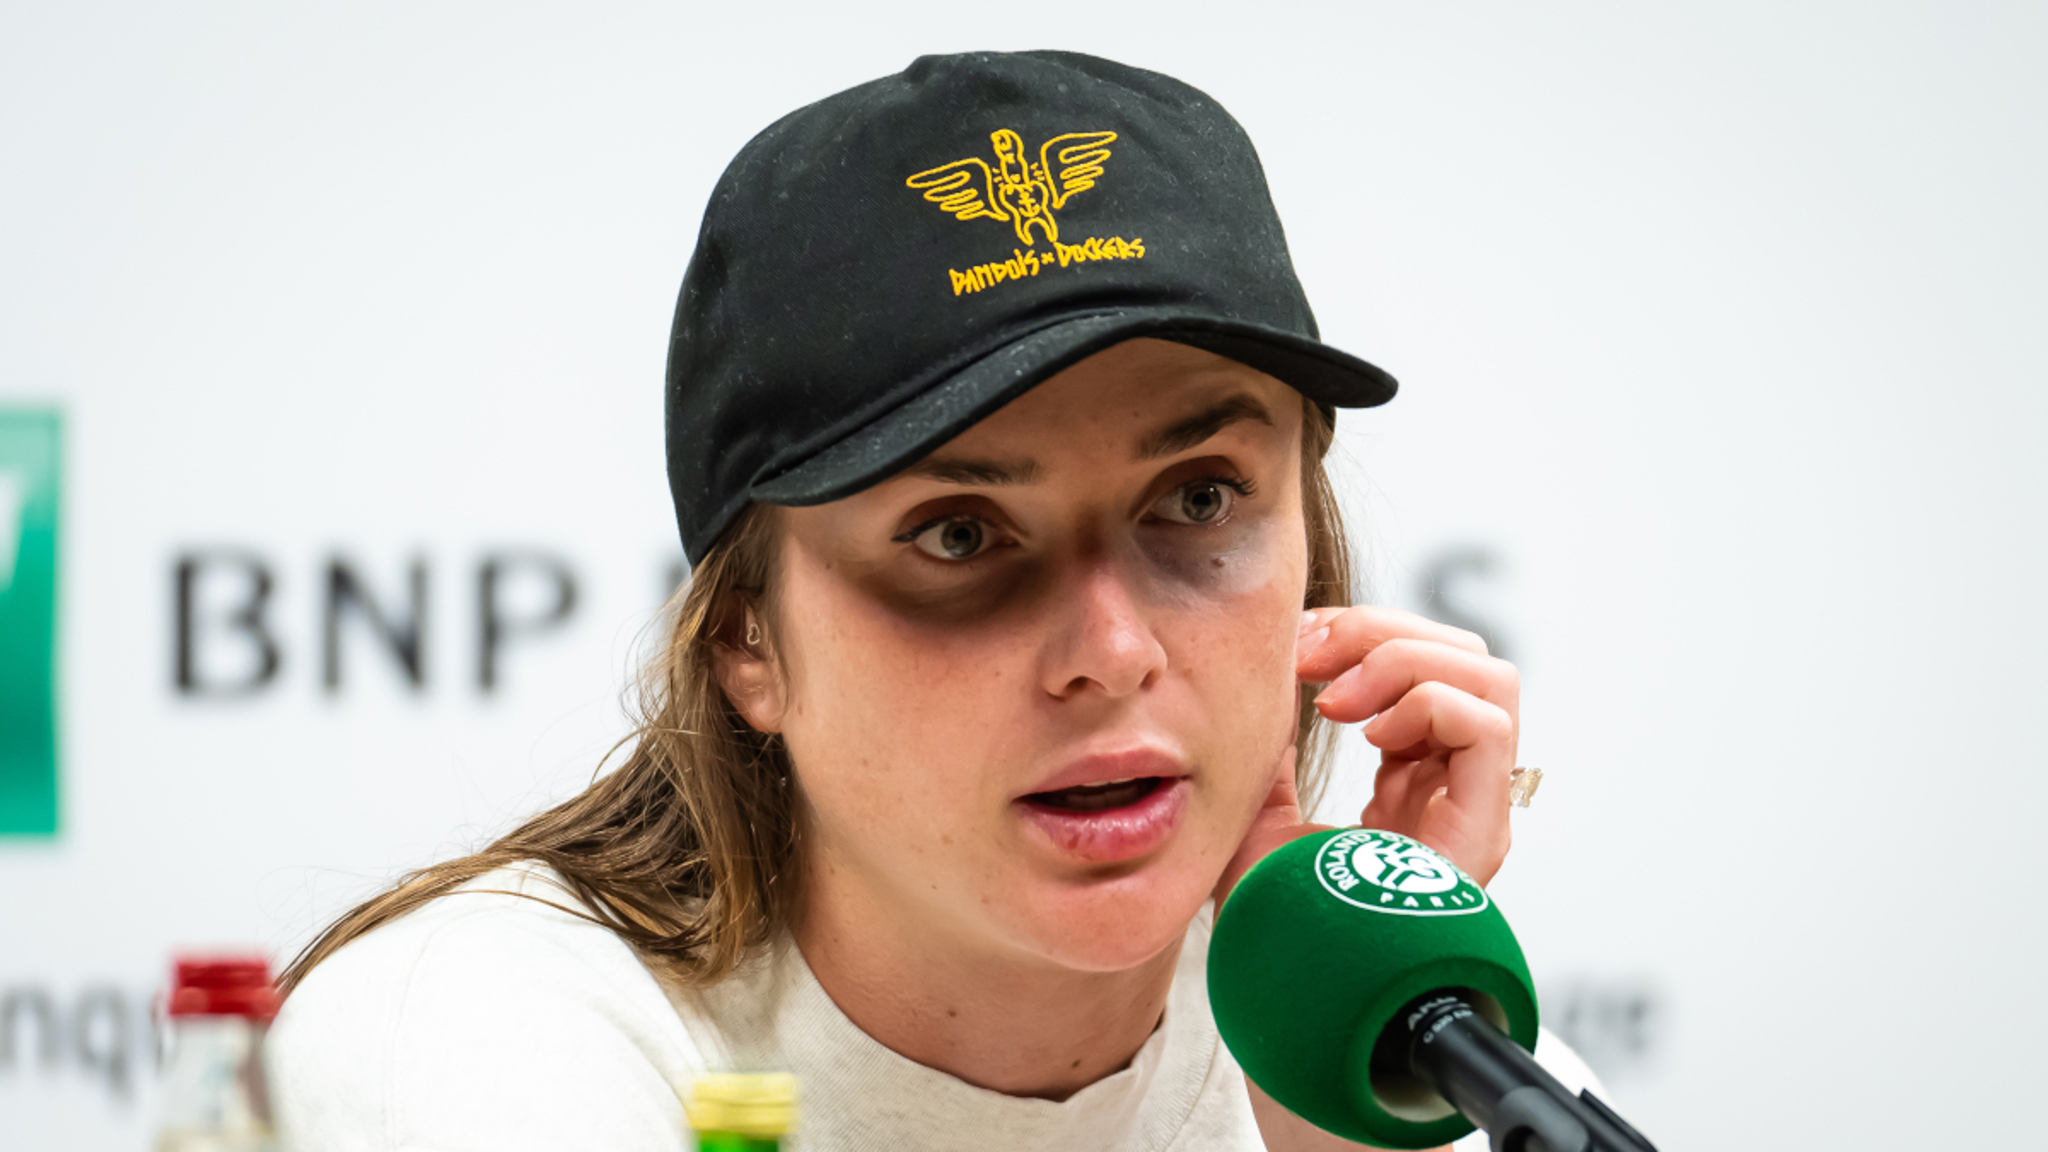 Svitolina accuses Sabalenka of 'inflaming' tensions with net standoff